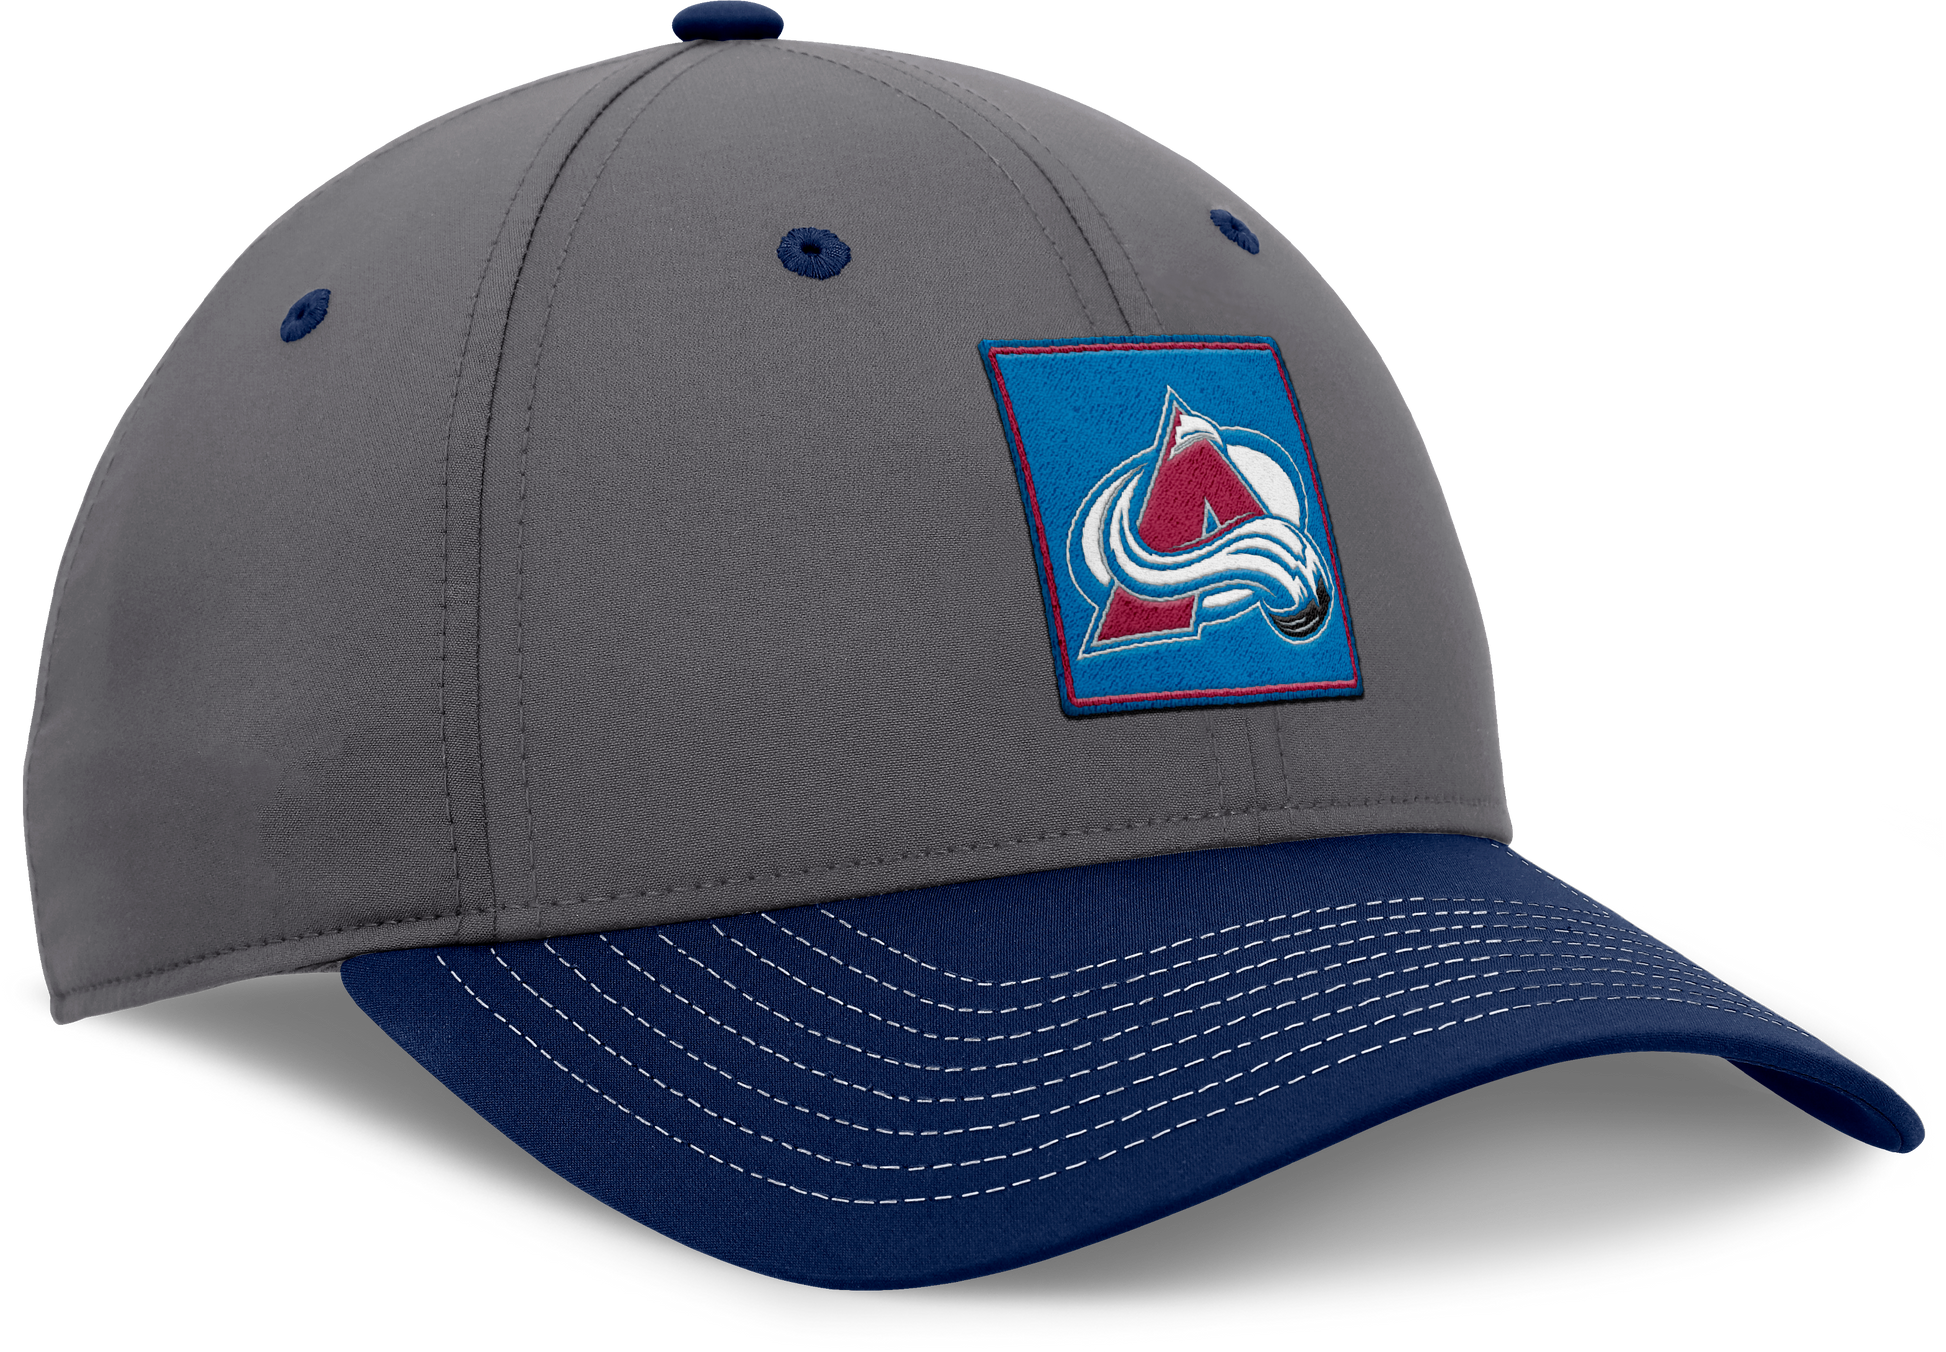 Blue square patch with Avs logo in middle on a grey hat with a navy blue bill